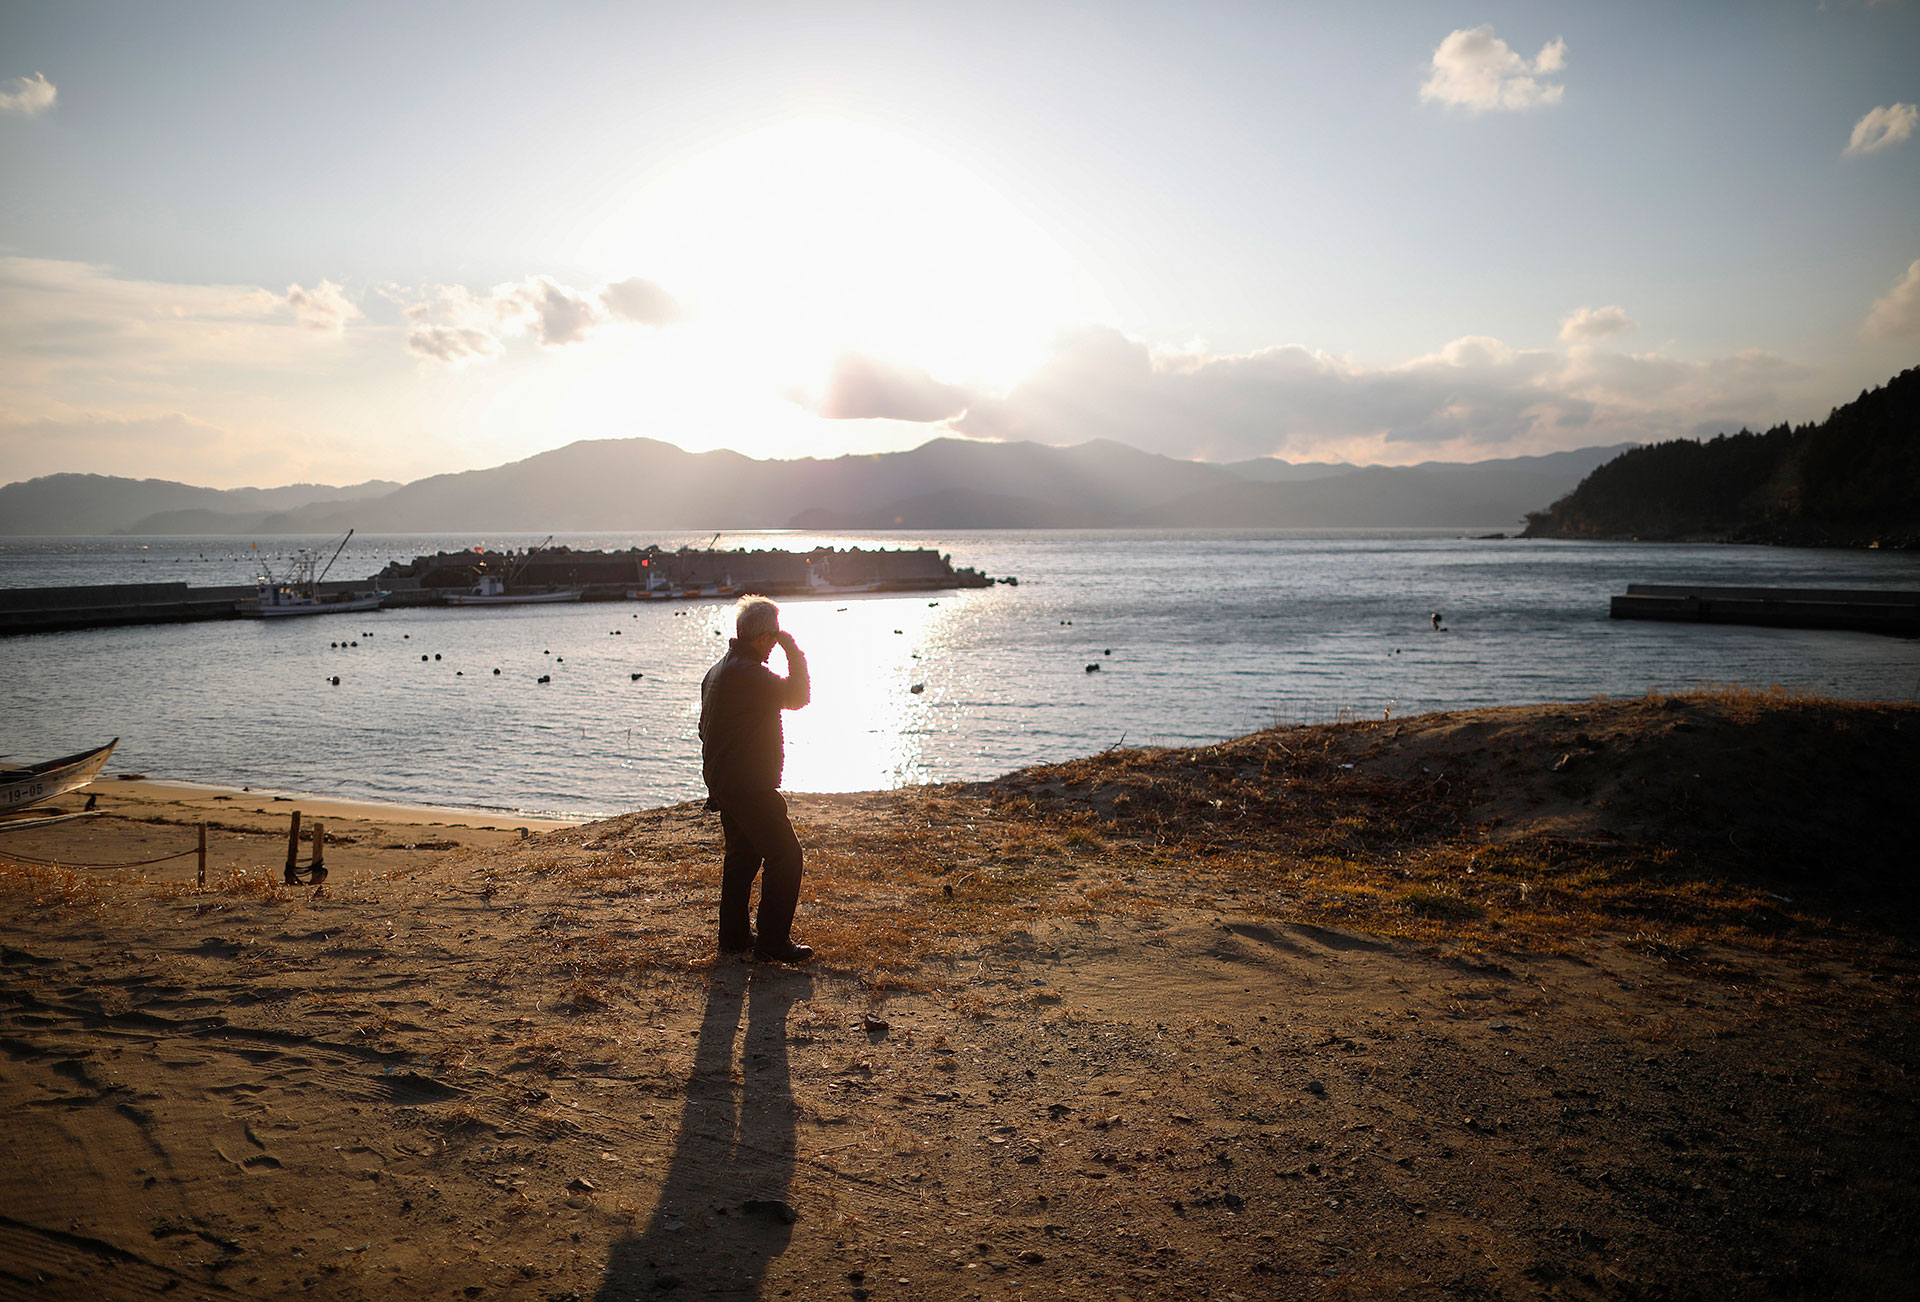 Ten years on, grief never subsides for some survivors of Japan’s tsunami